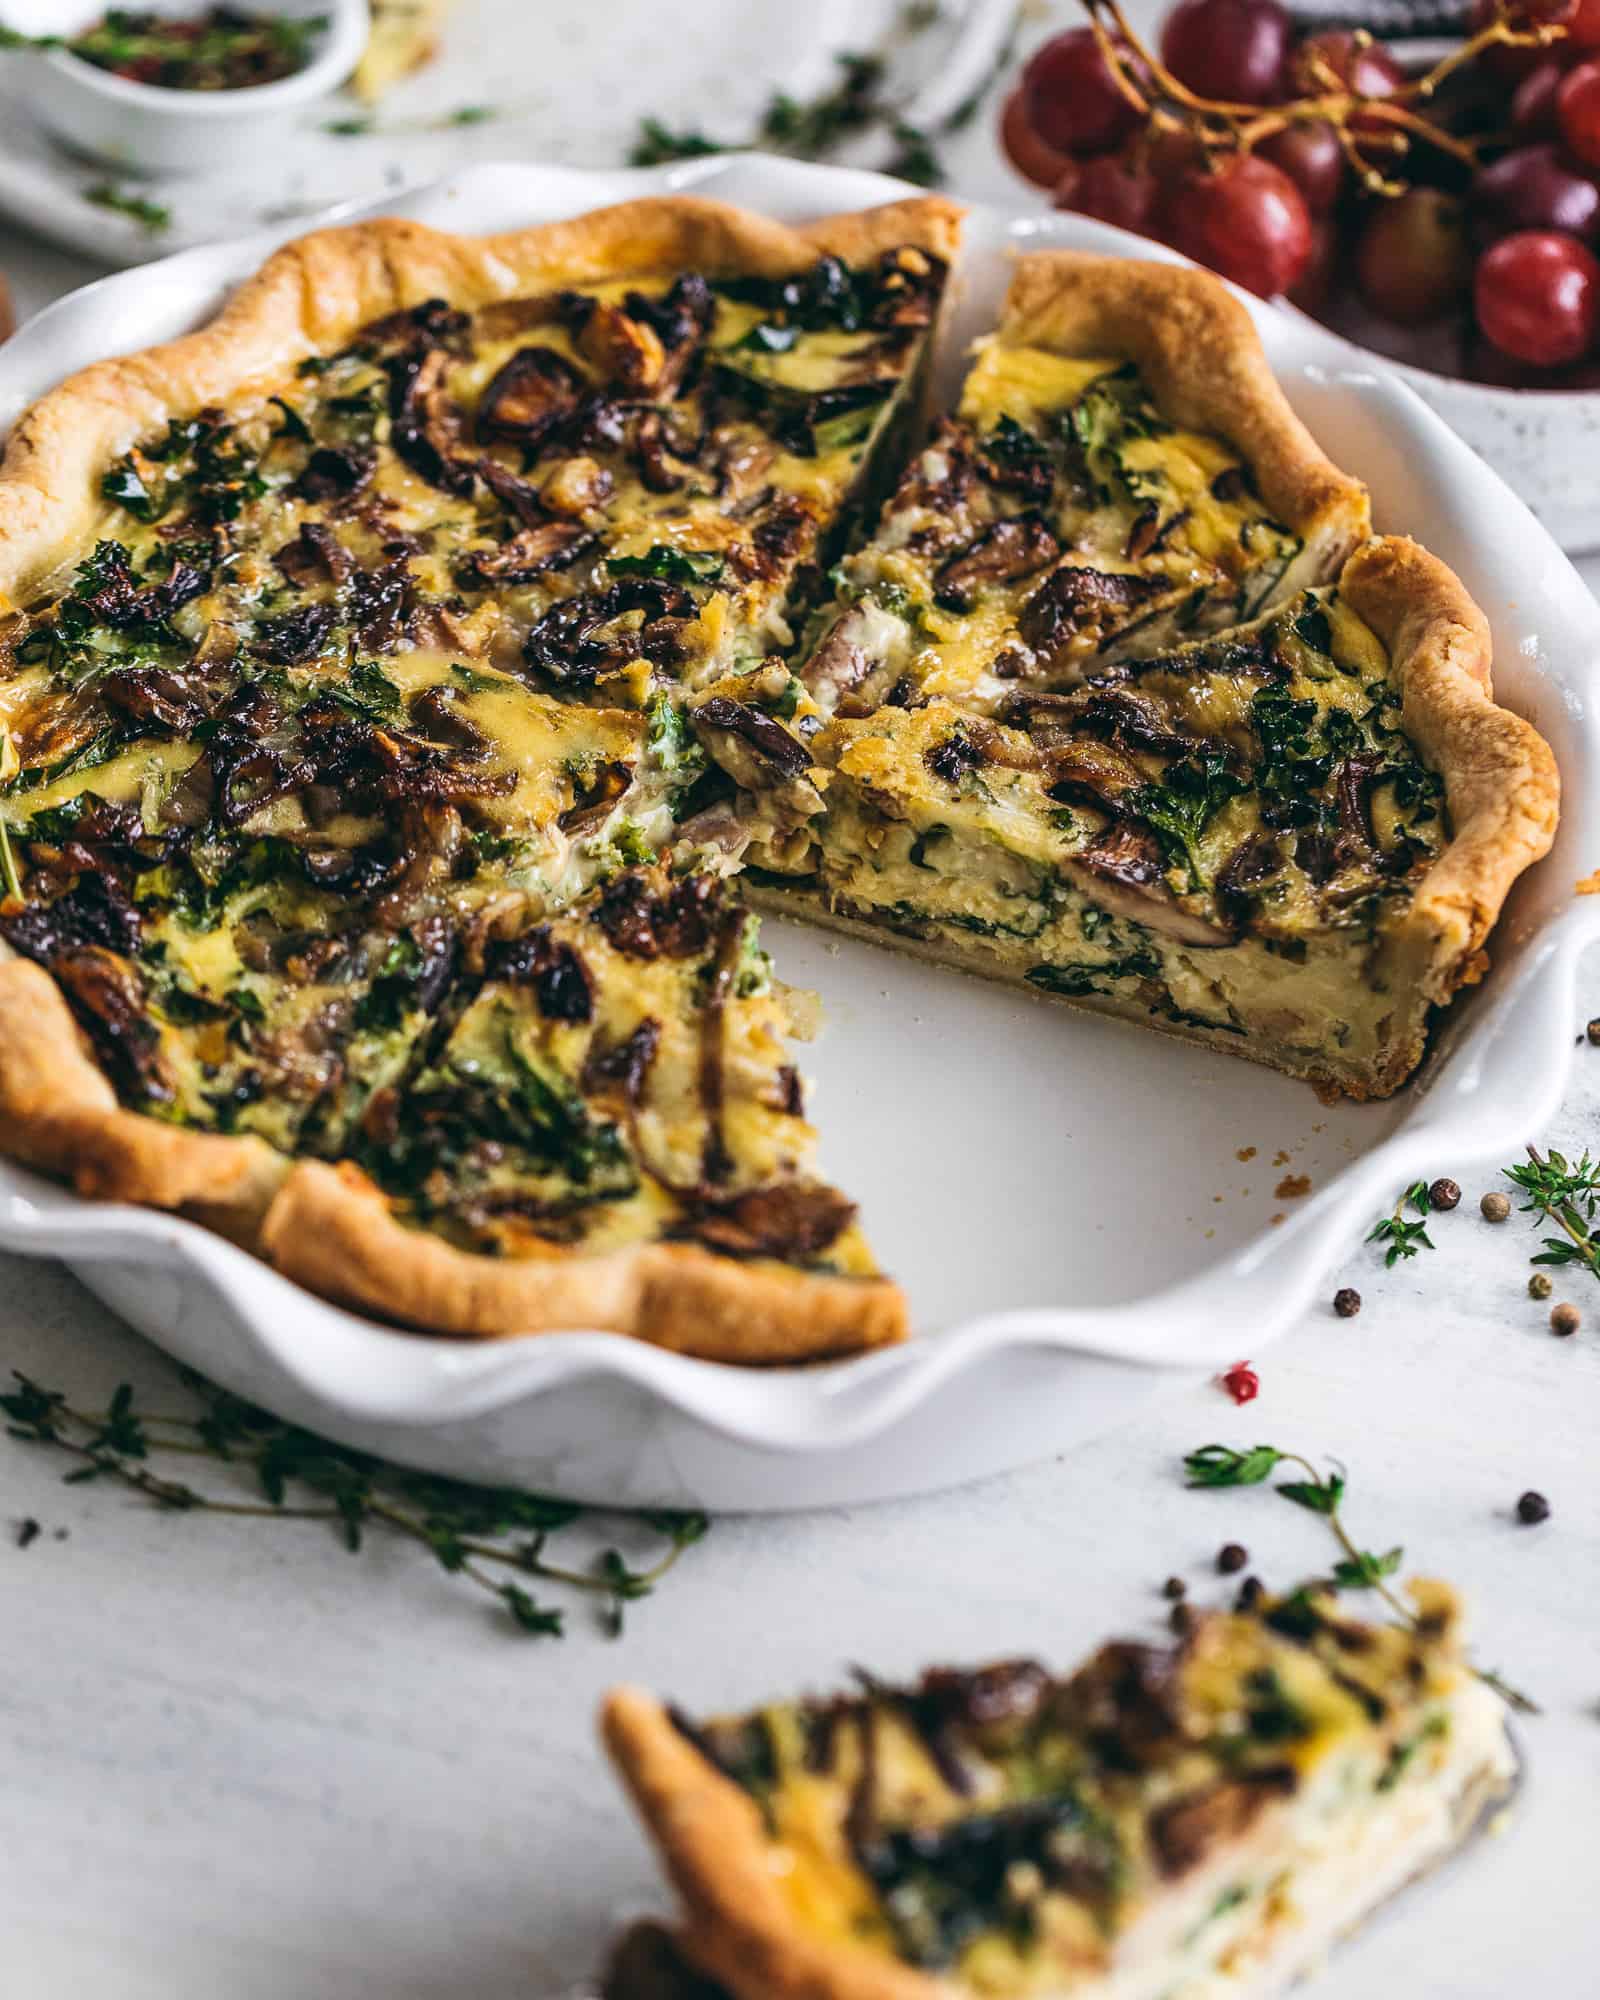 Kale and Mushroom quiche in a pie pan with a slice cut out of it